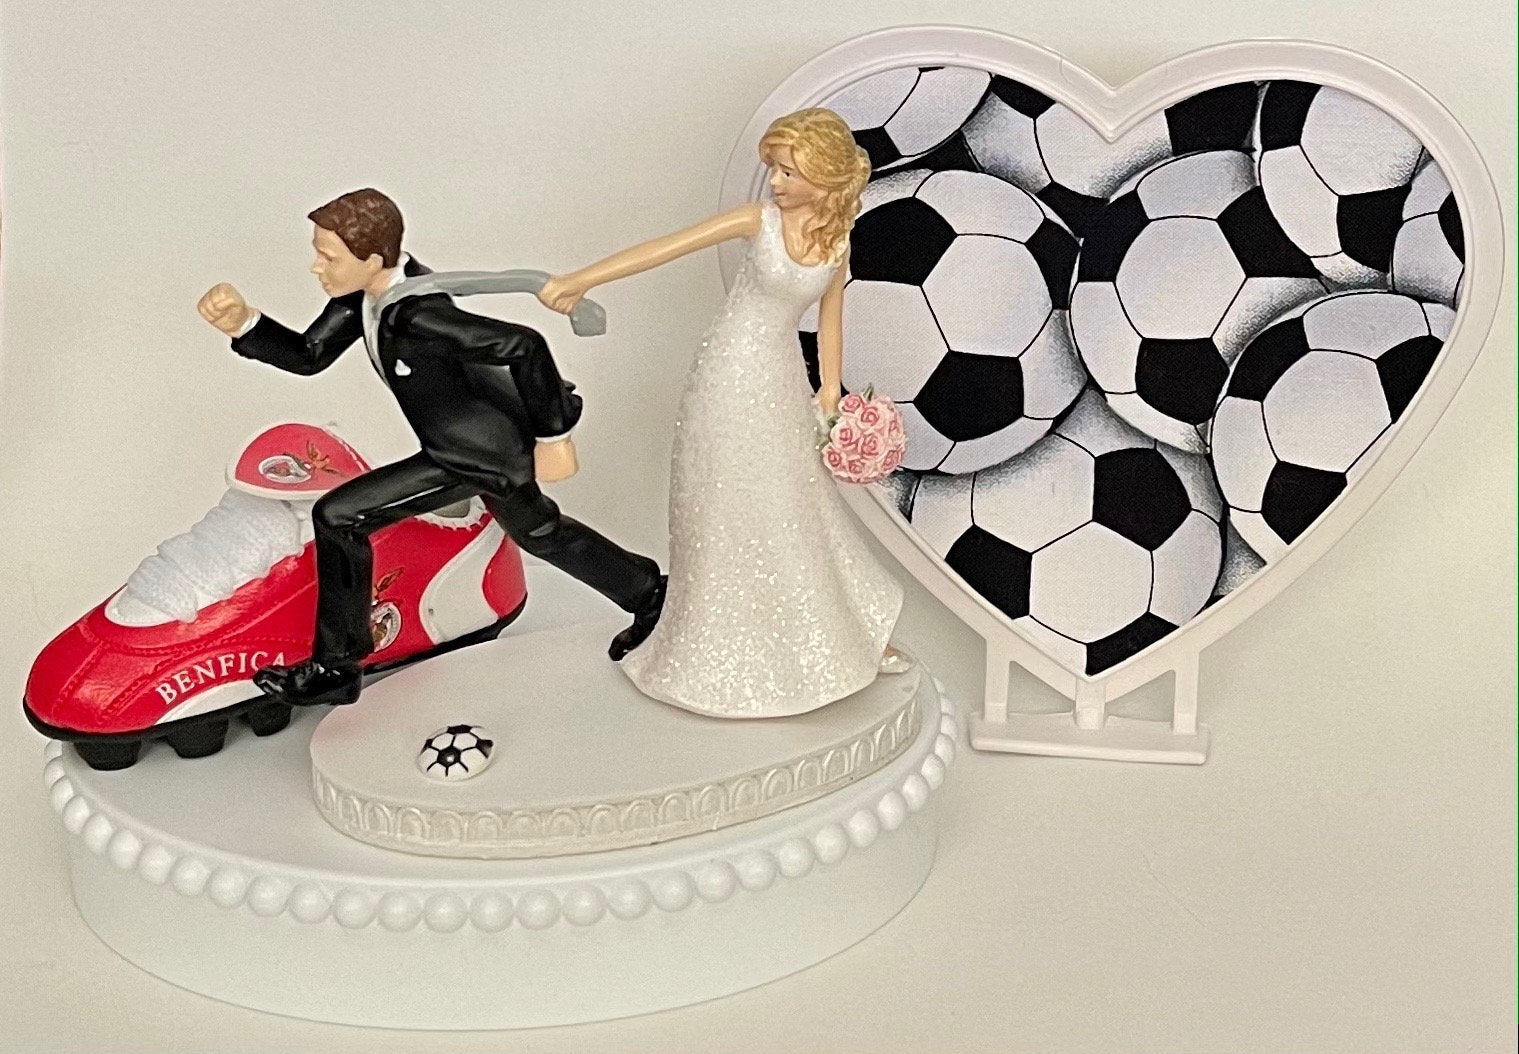 Wedding Cake Topper SL Benfica Soccer Portugal Football Themed Running Humorous Bride and Groom OOAK Funny Sports Fans Groom's Cake Top